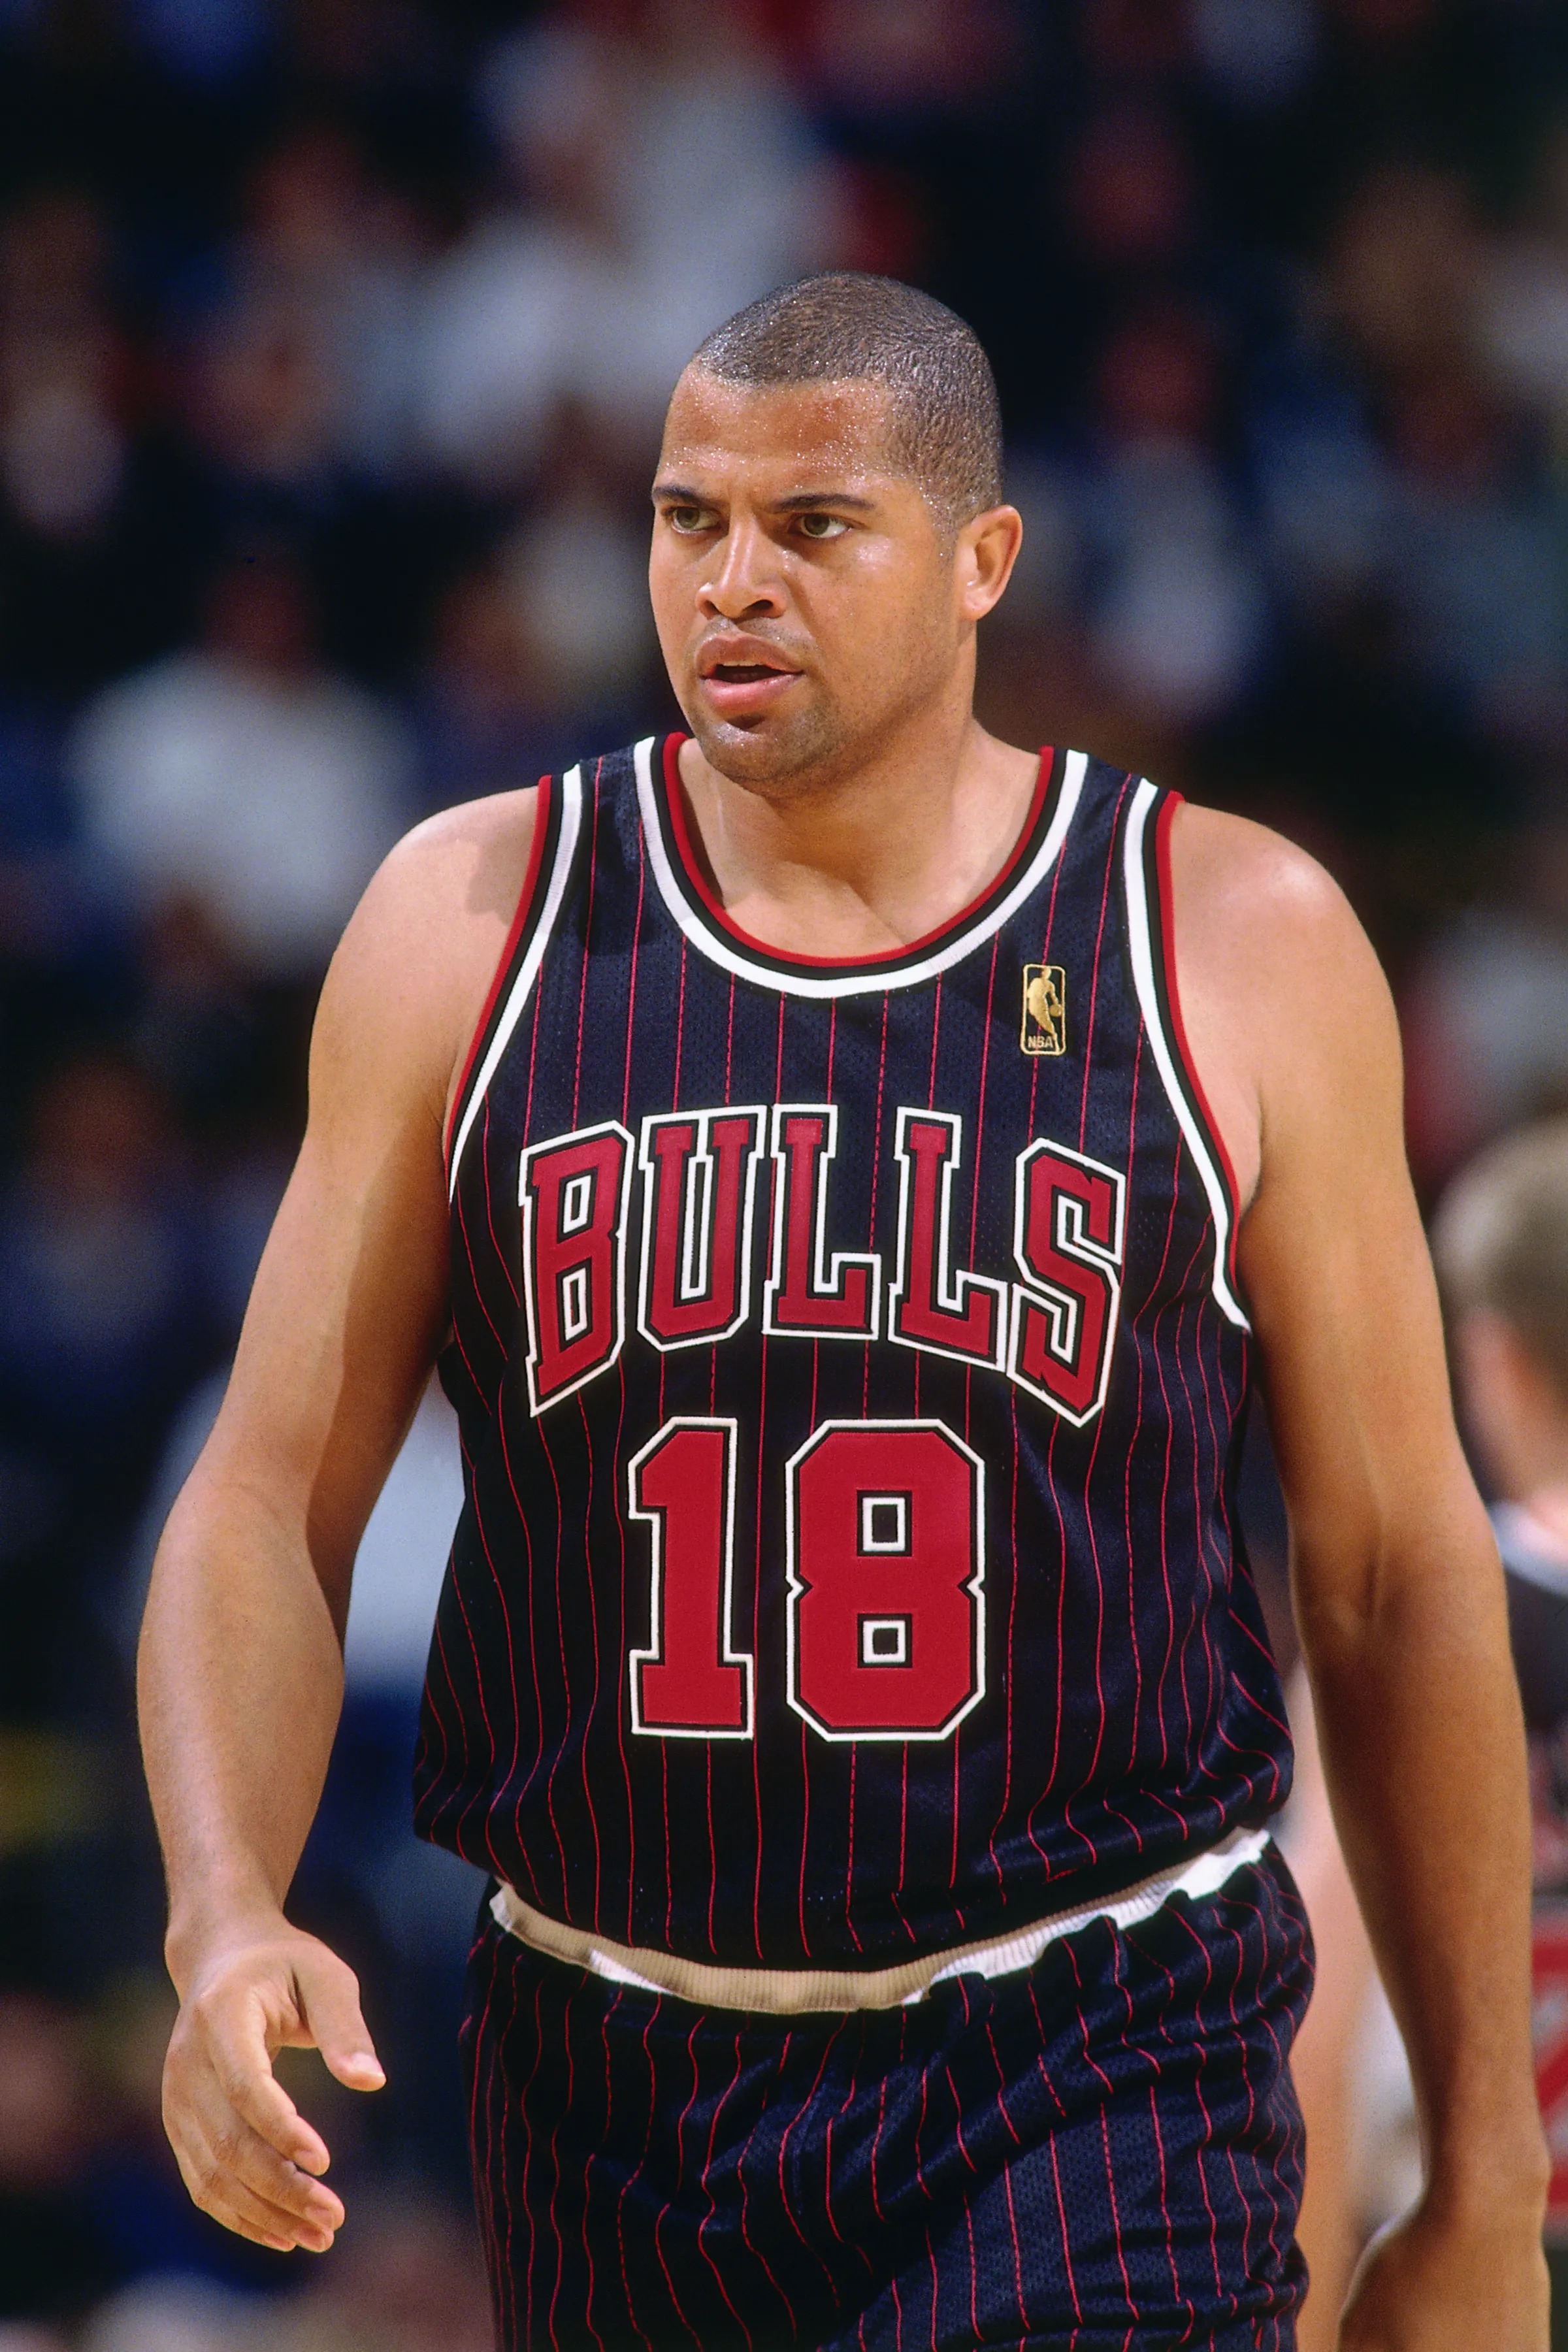 Former NBA star Brian Williams, later known as Bison Dele, led an eccentric life post-sports, adopting a nomadic lifestyle in Asia and indulging in unconventional activities. His boat, Hakuna Matata, intended for a Tahiti to Hawaii voyage, vanished. Only Dele's brother, Miles Dabord, resurfaced, later facing legal issues for using Dele's checks. The suspected connection to the unresolved murders persists, with Dabord's overdose complicating confirmation.